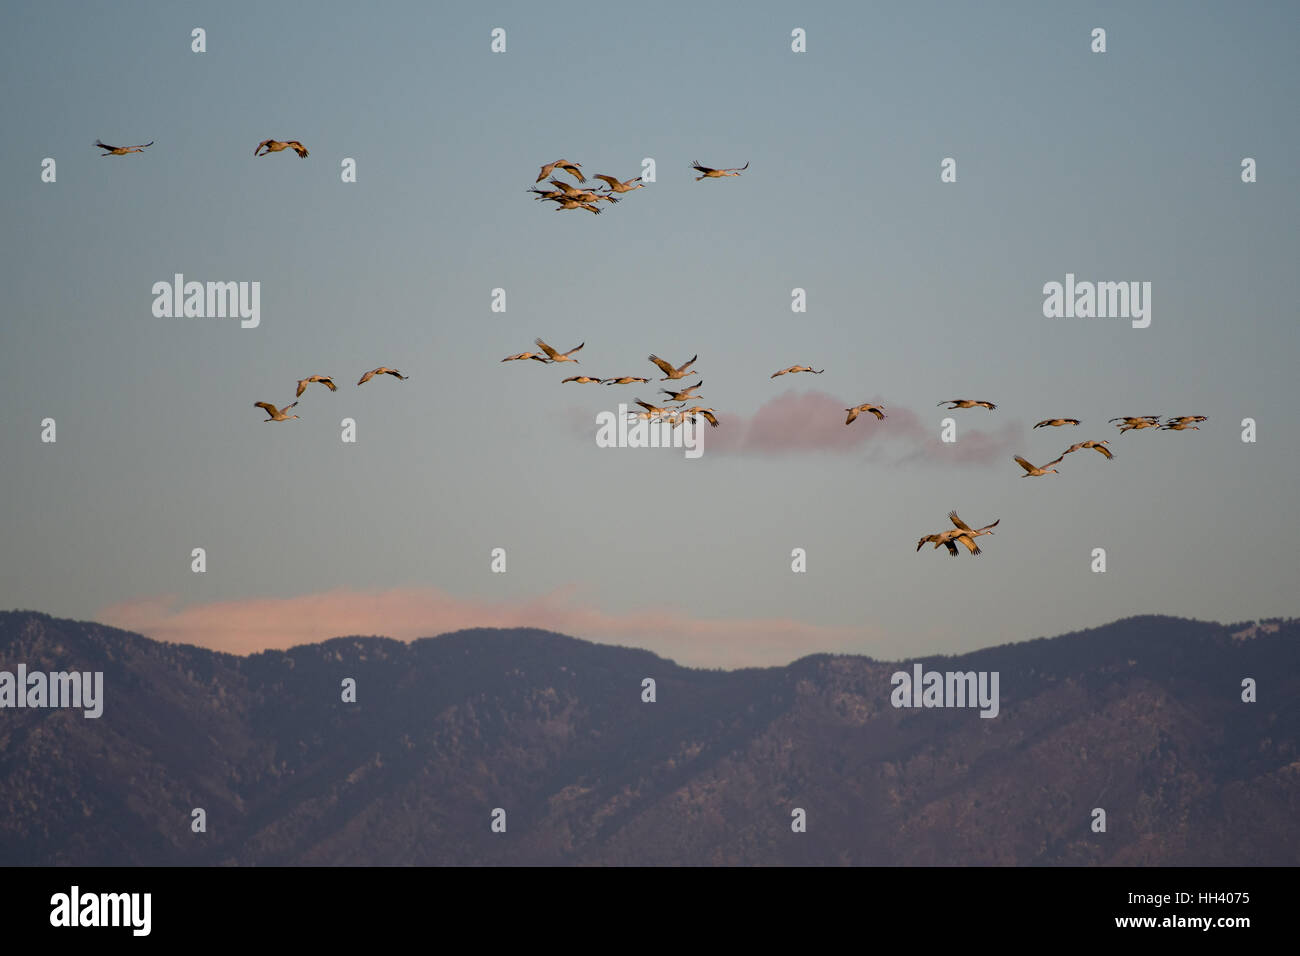 Flying Sandhill Cranes, (Grus canadensis), Ladd S Gordon Waterfowl Management Area, New Mexico, USA. Stock Photo